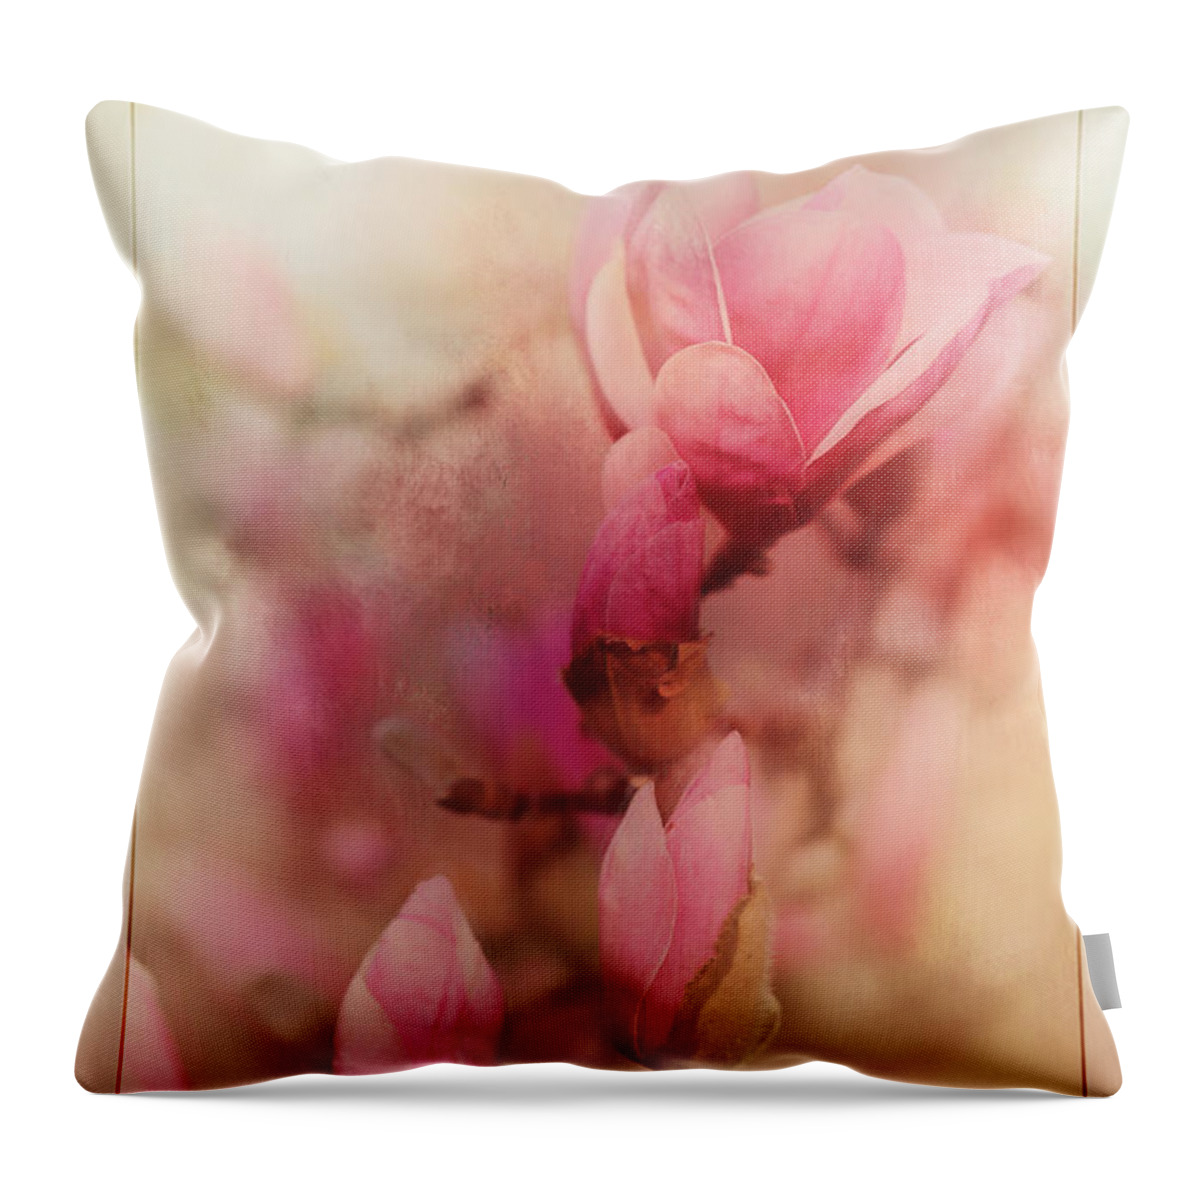 Greeting Card Throw Pillow featuring the photograph You Are So Beautiful #2 by Theresa Campbell